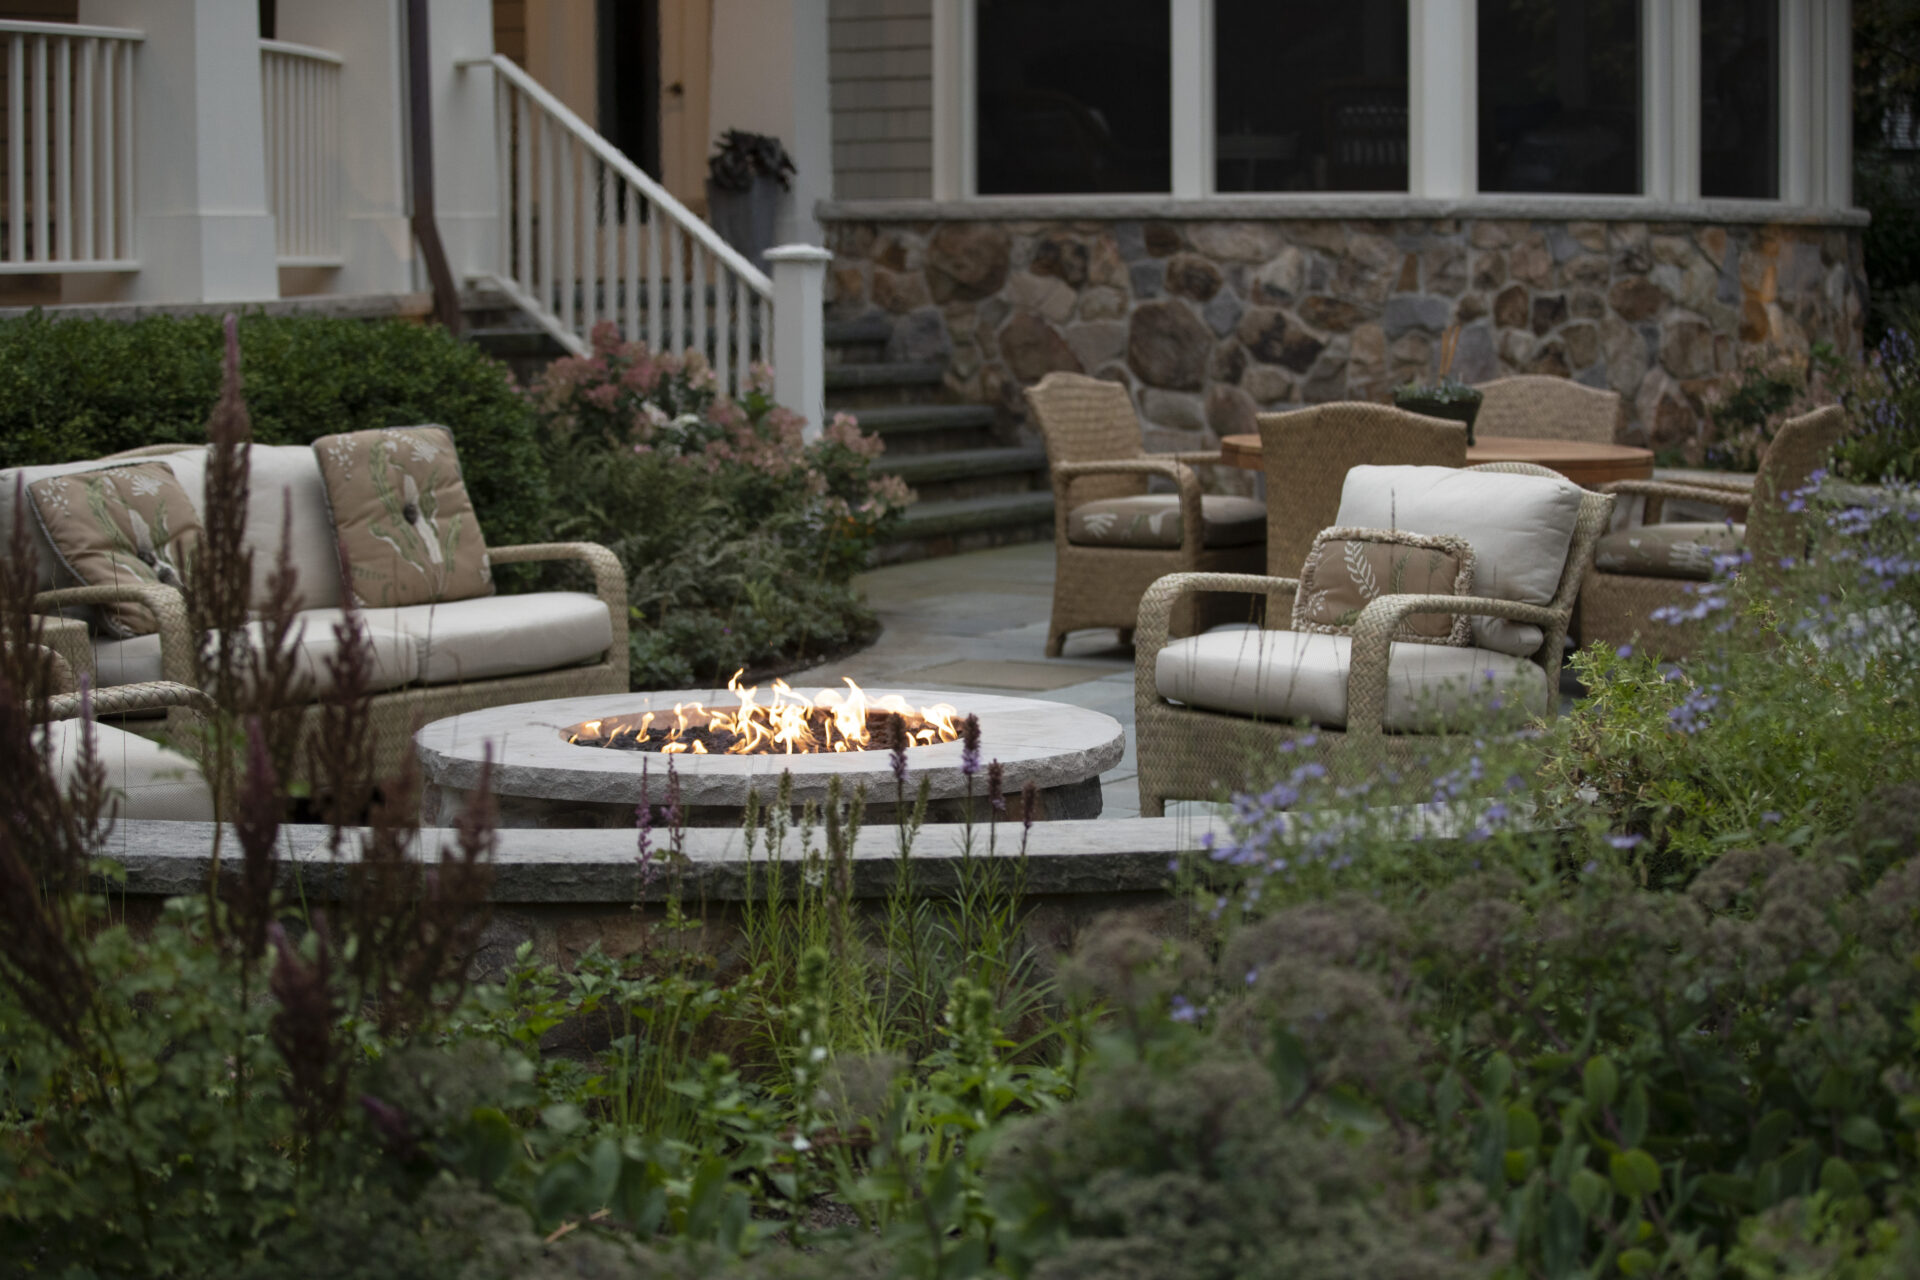 Let us design and install your outdoor room.